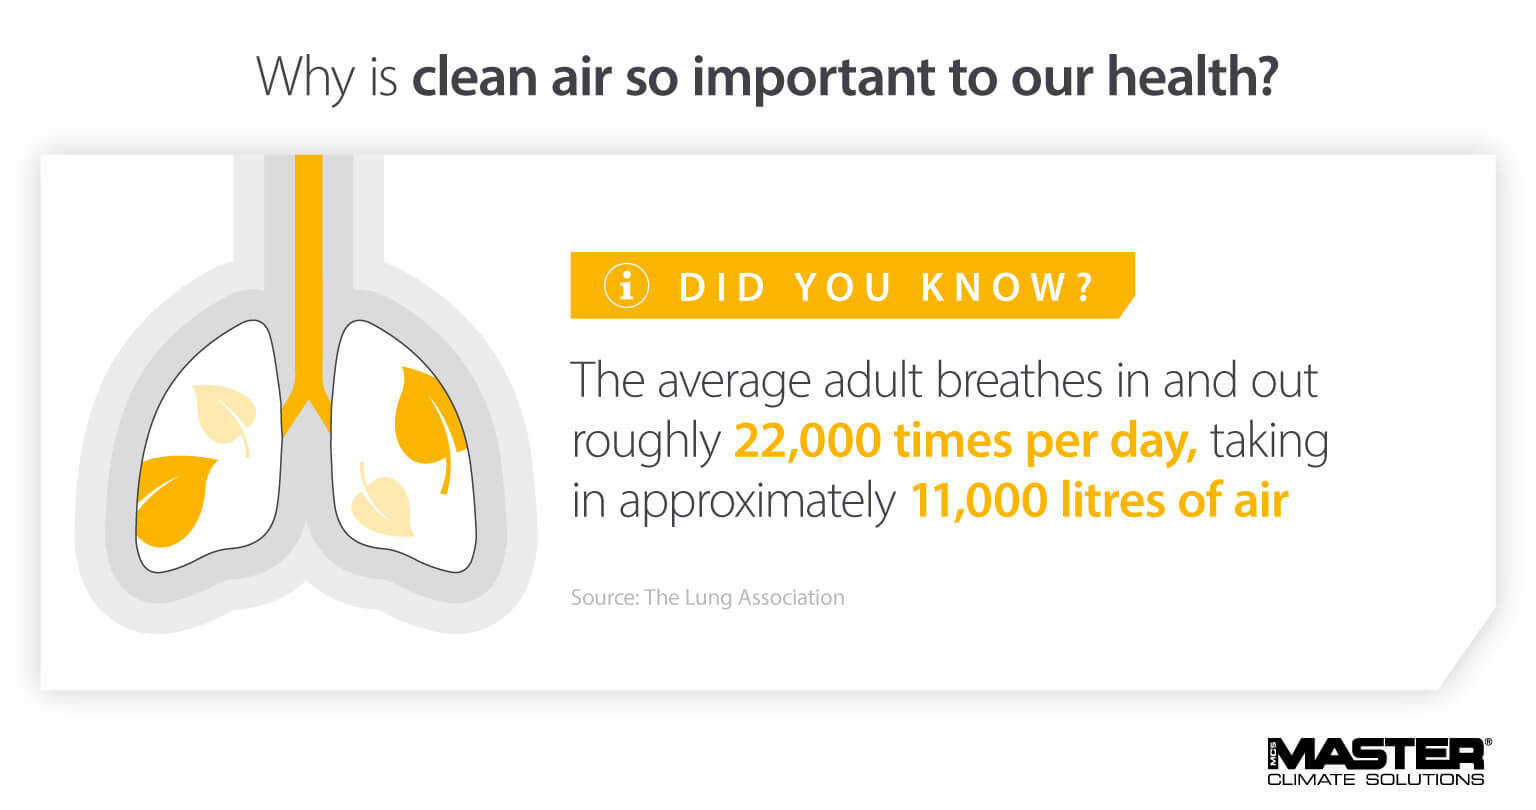 Why clean air is important to health as adults breath 11,000 litres of air per day - statistics infographic